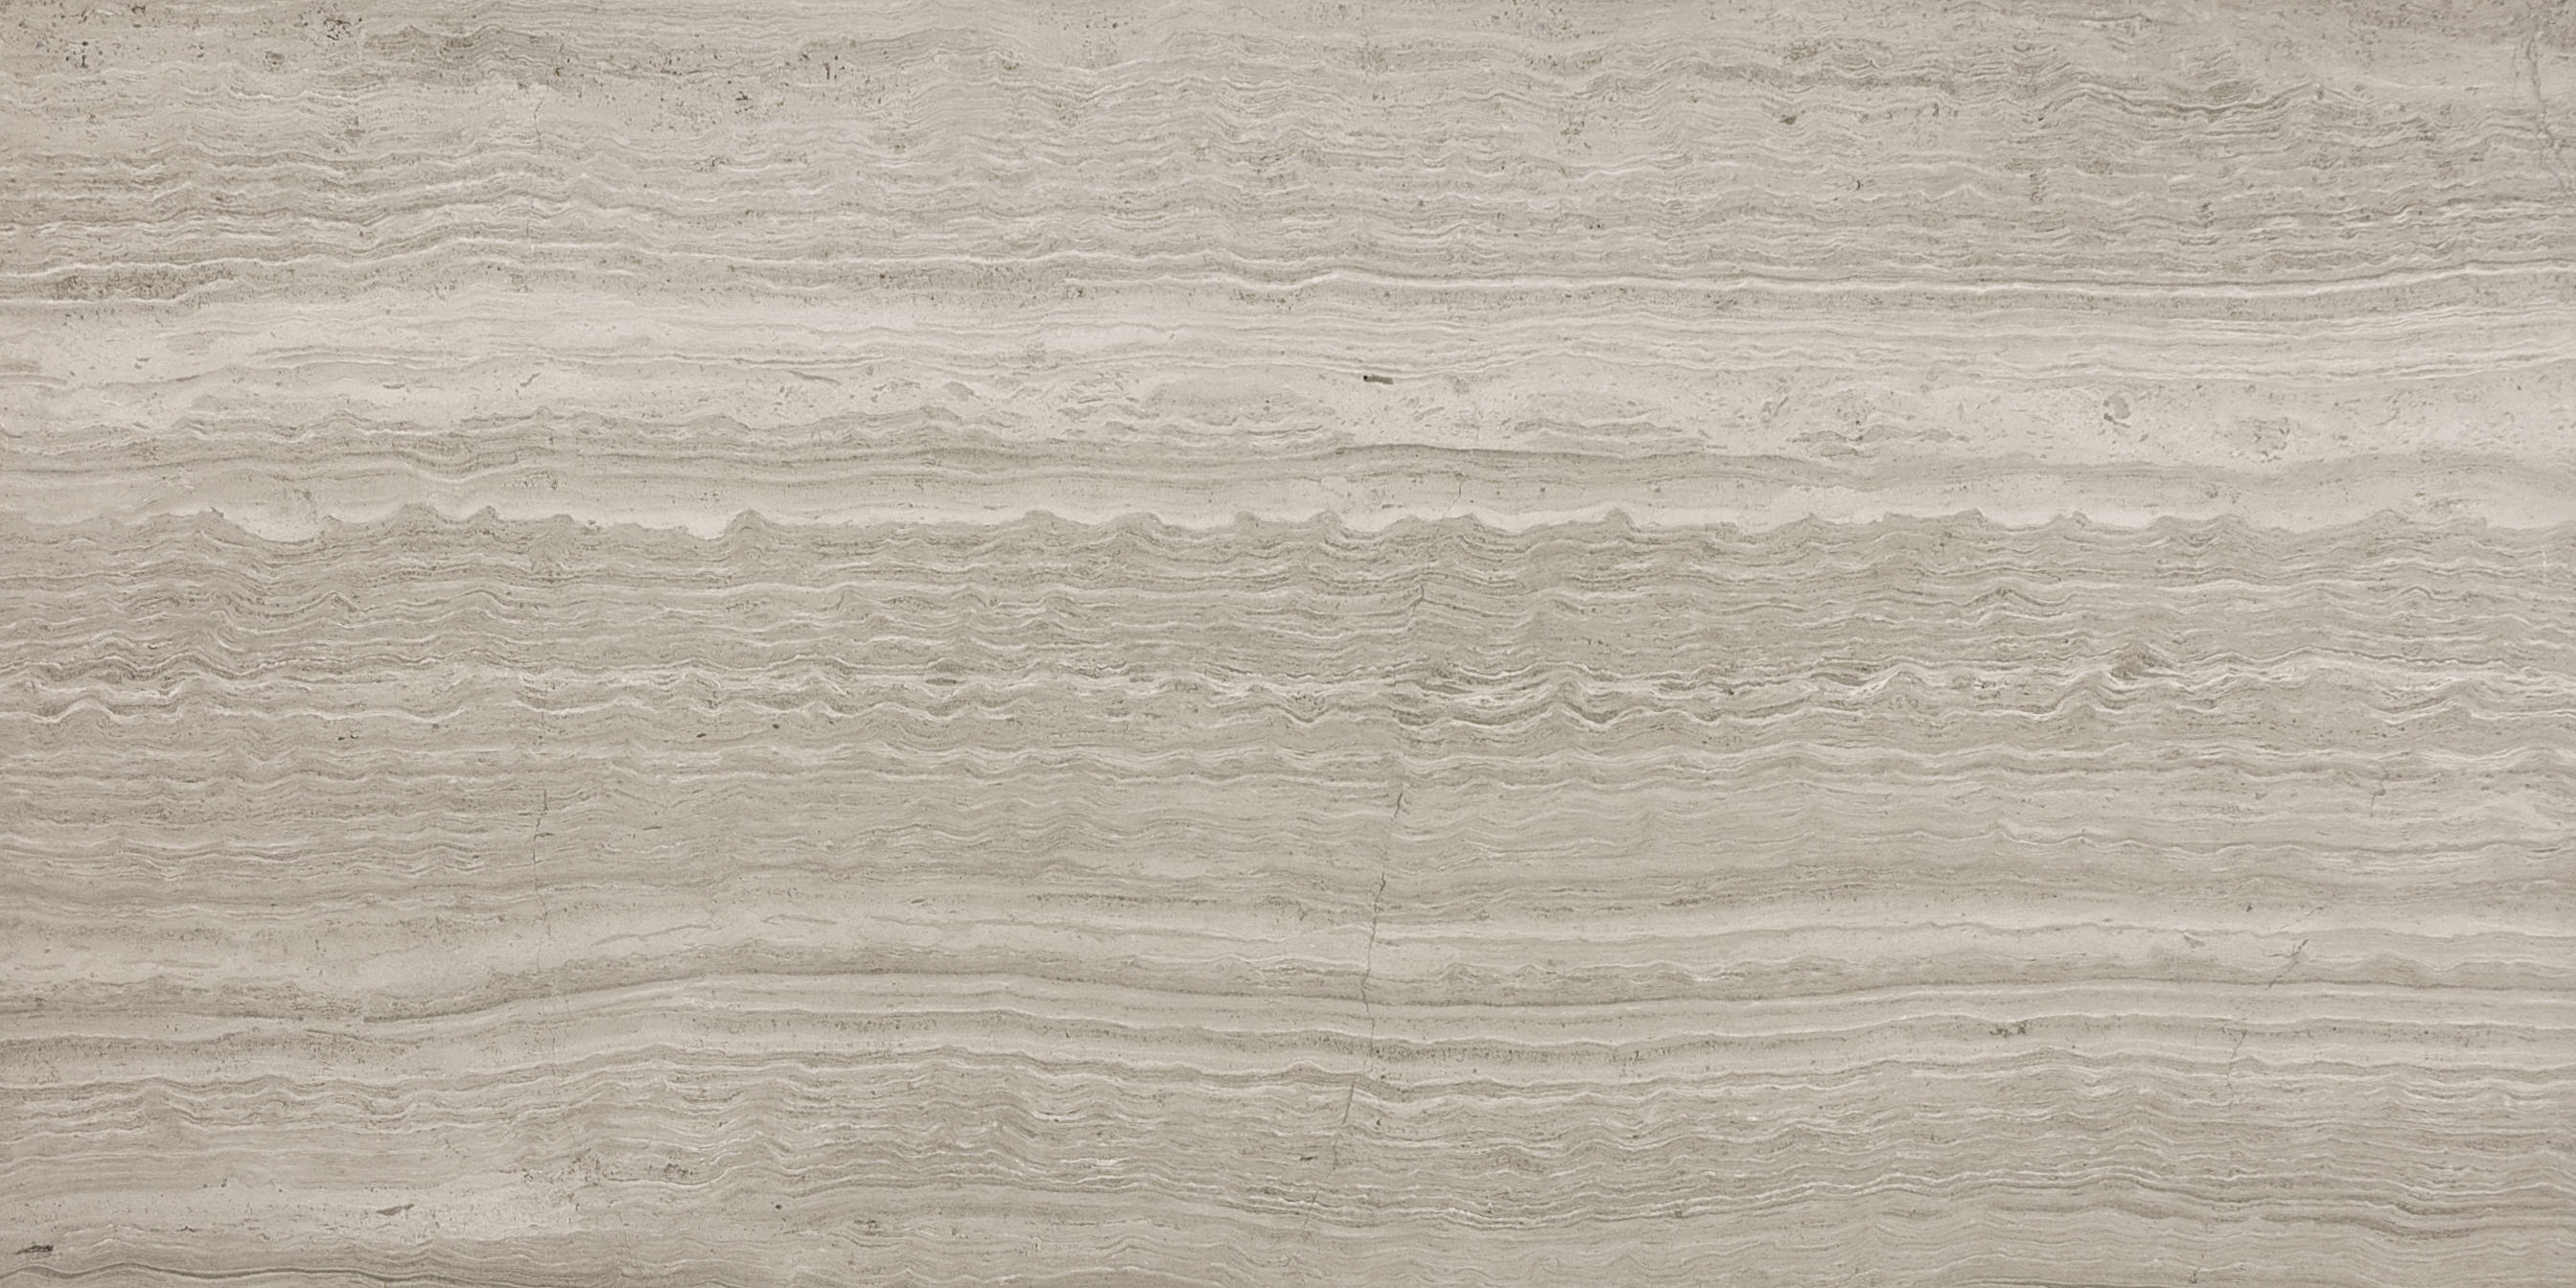 limestone pattern natural stone field tile from strada mist anatolia collection distributed by surface group international honed finish straight edge edge 12x24 rectangle shape